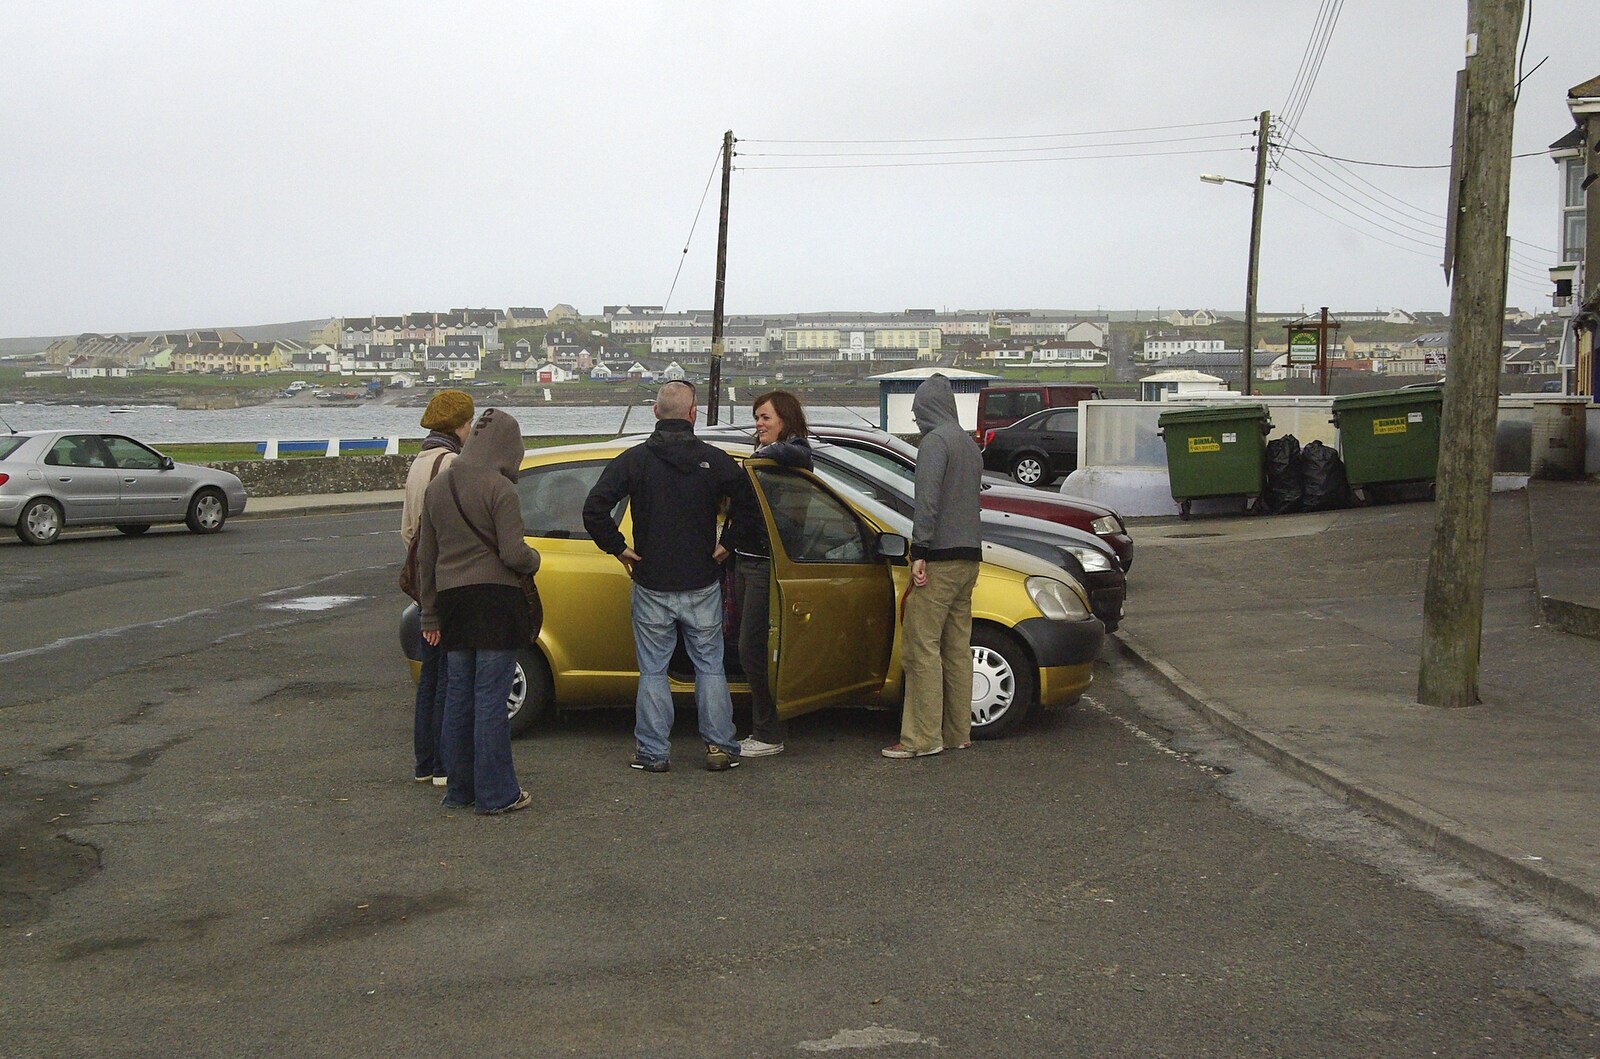 30th Birthday Party in Kilkee, County Clare, Ireland - 22nd September 2007: There's a meeting by a car